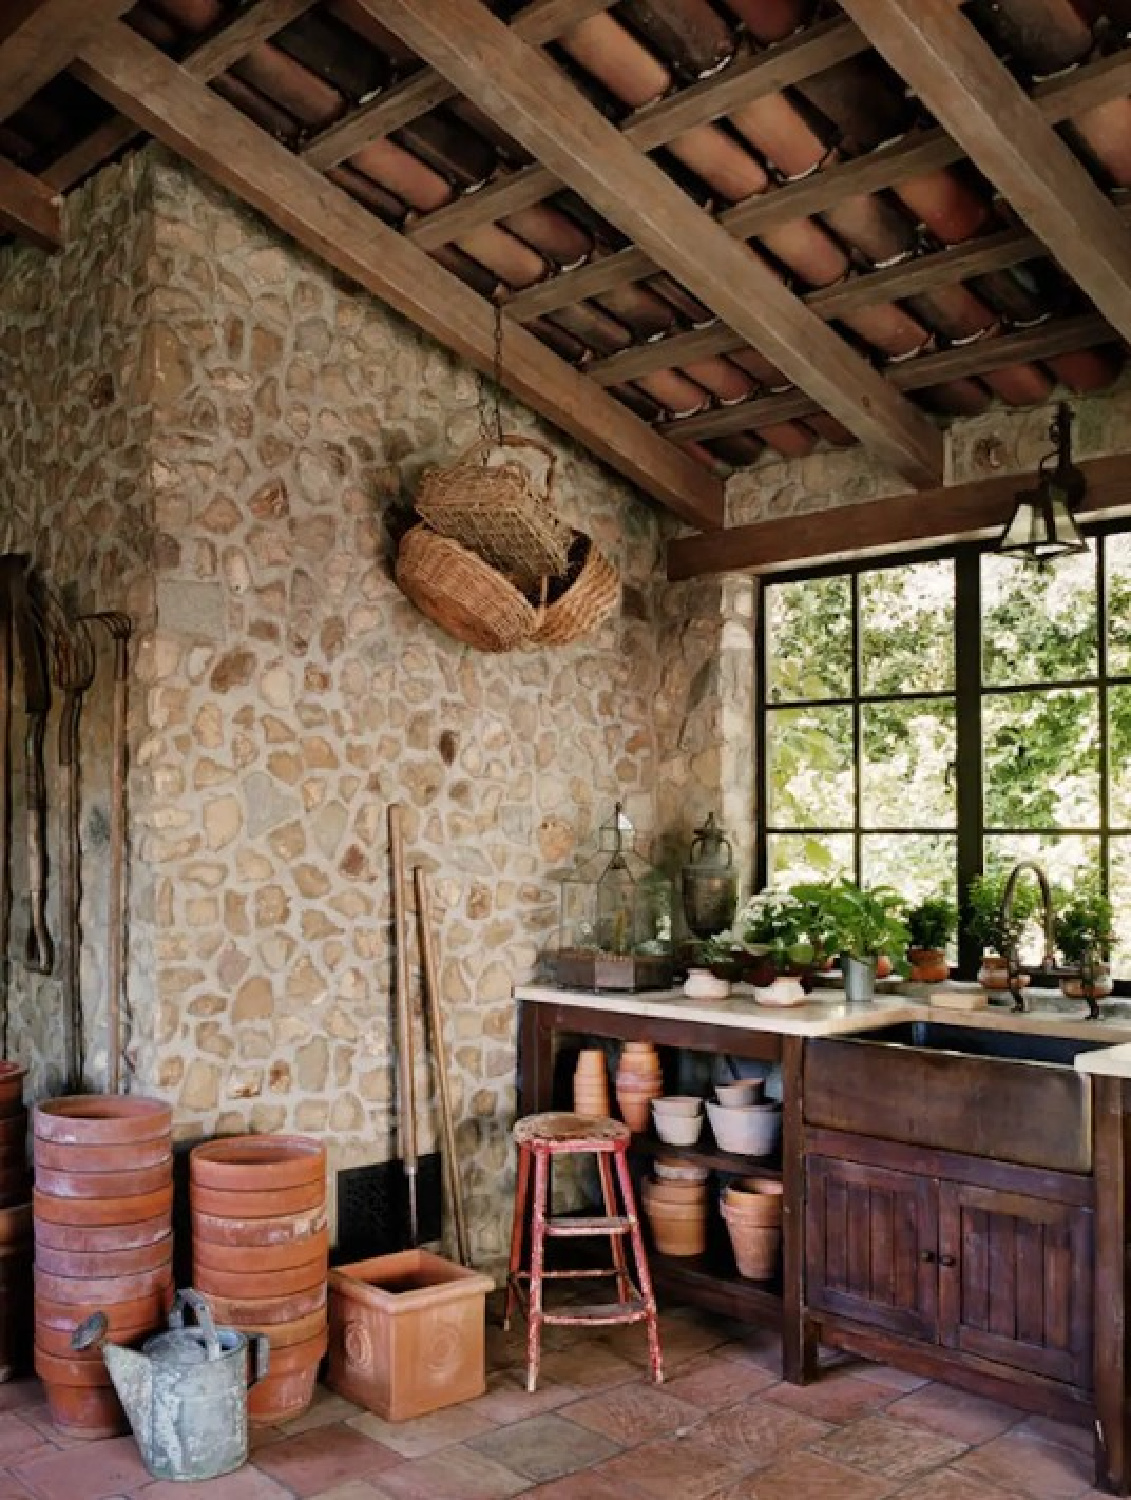 Thomas Calloway Spanish Colonial rustic potting room with stone and rustic wood. #europeancountry #rusticinteriors #sophisticatedinteriors